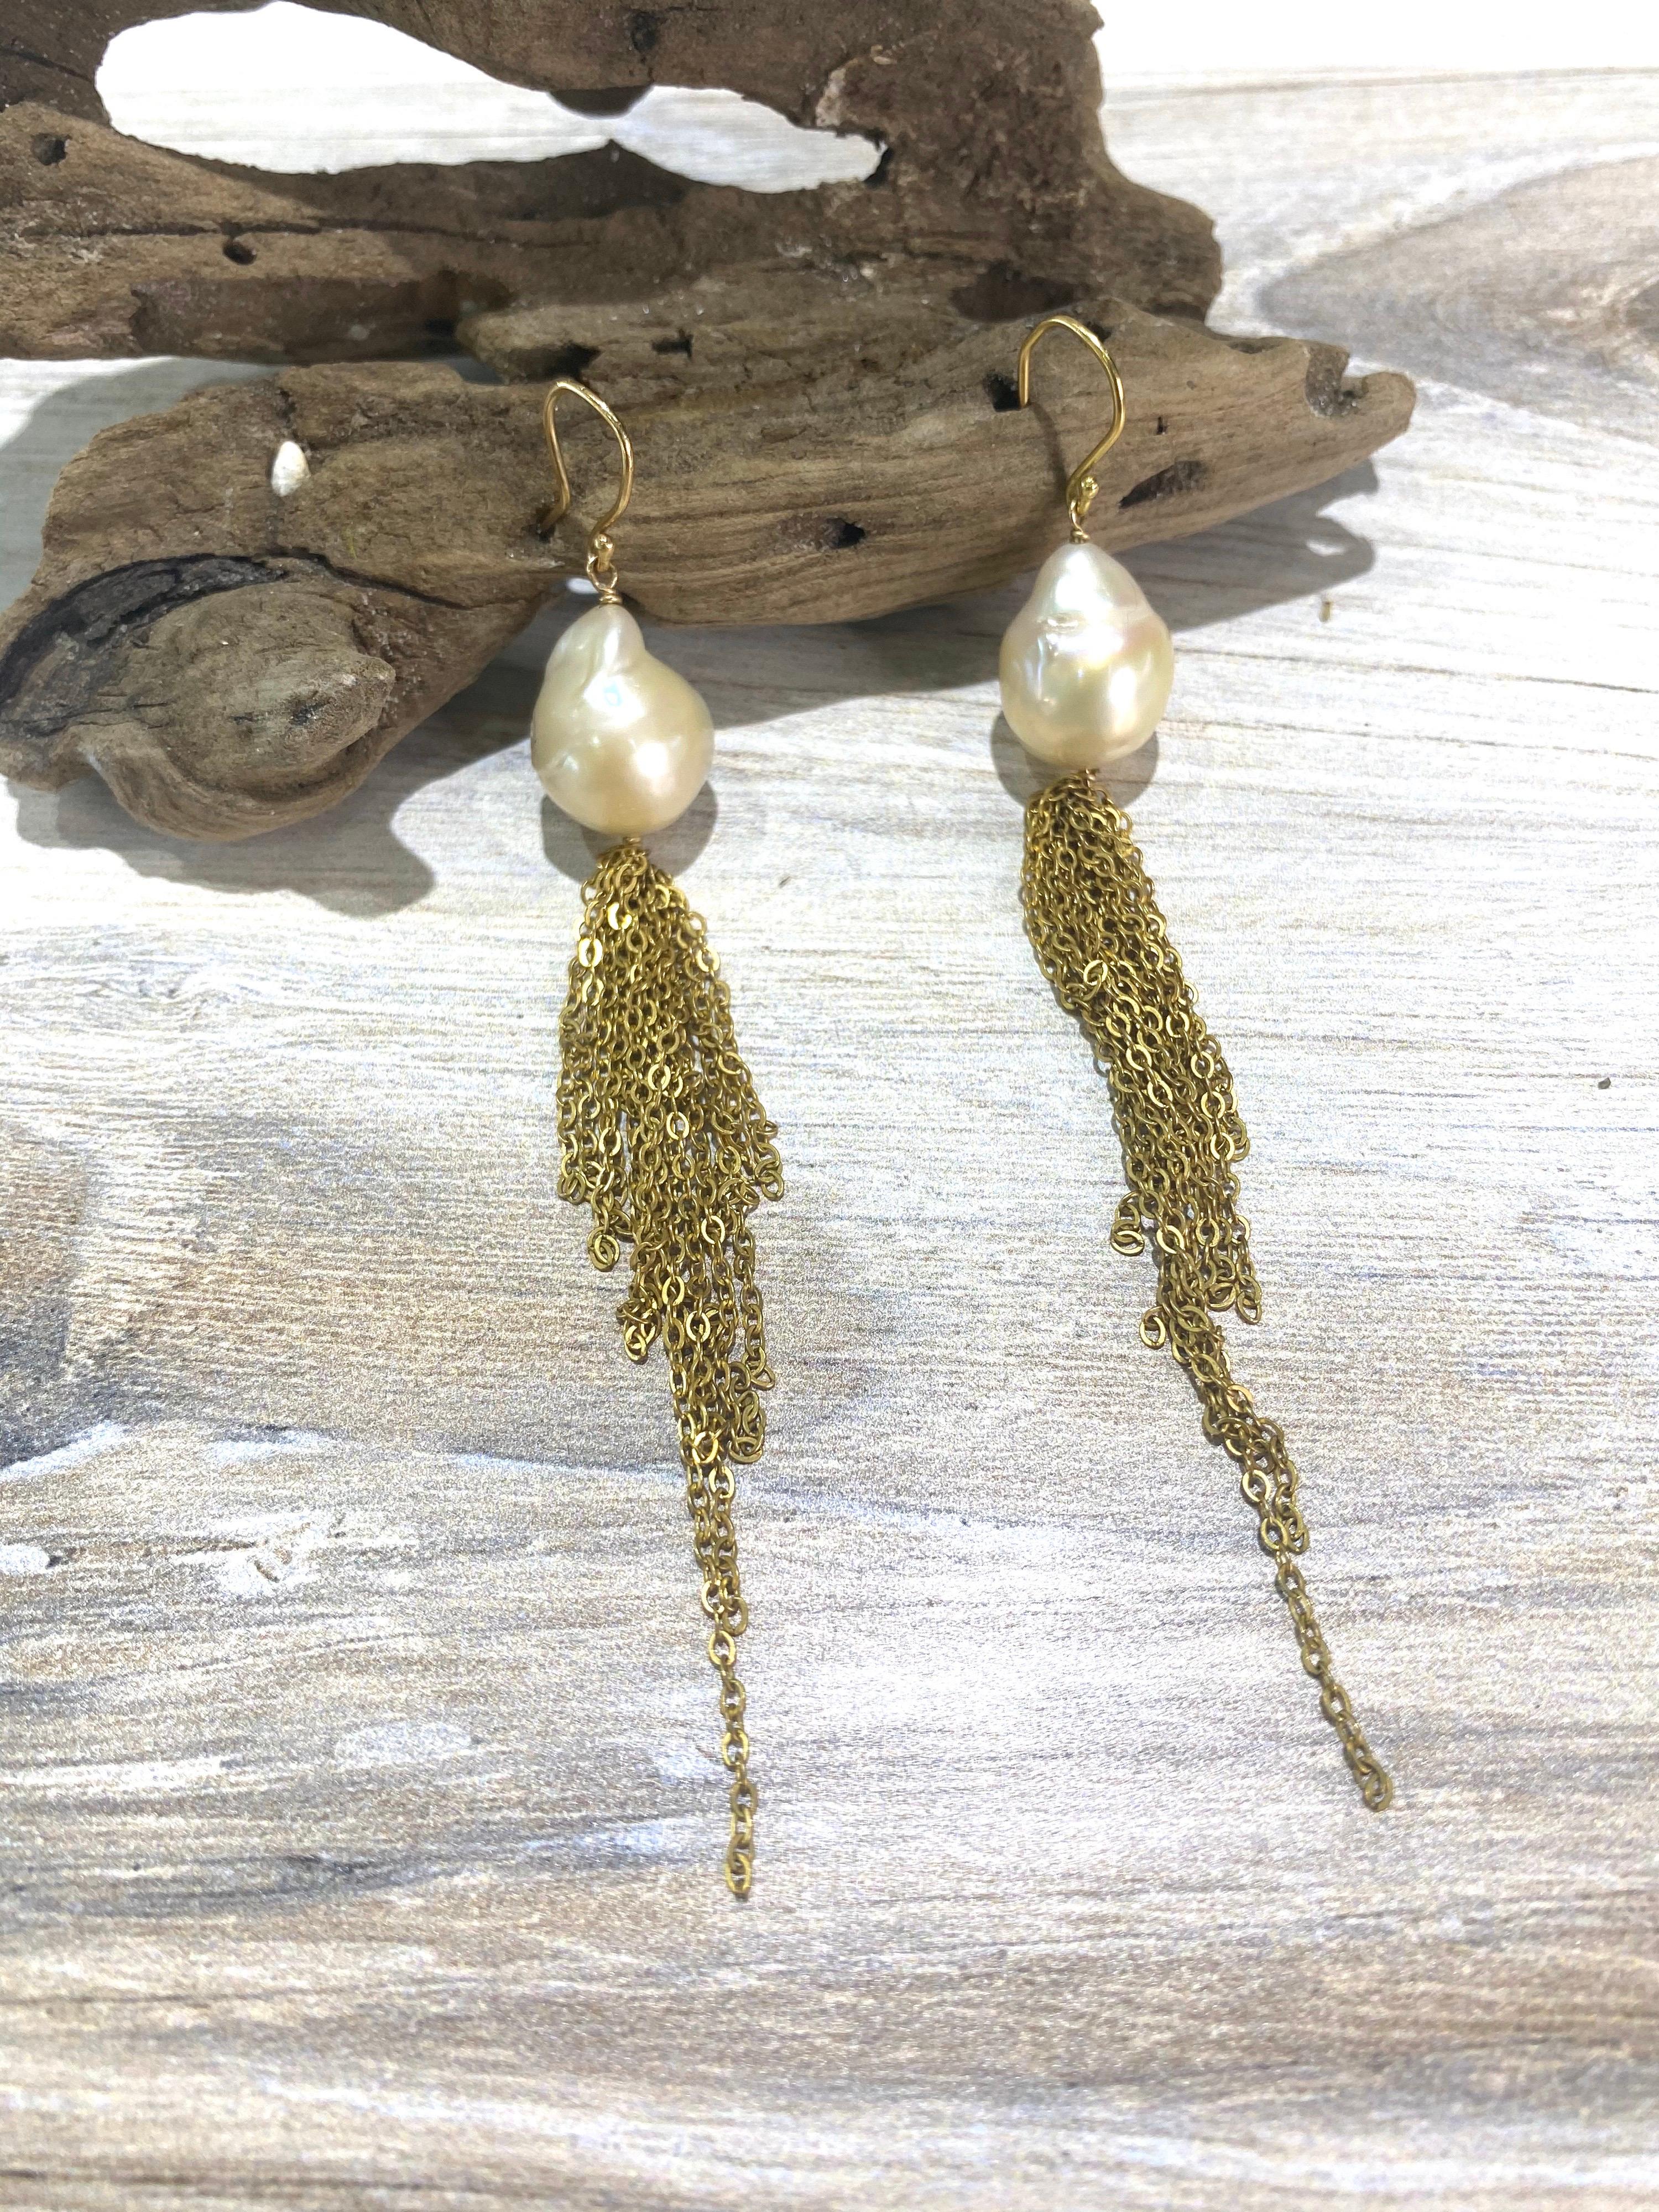 These scrumptious earrings earrings are made of baroque, naturally colored champagne, 12mm in size, excellent luster with an 18k yellow gold hook.  Tassels are made of shimmering strands of 14k GF chain.  Earrings are 4